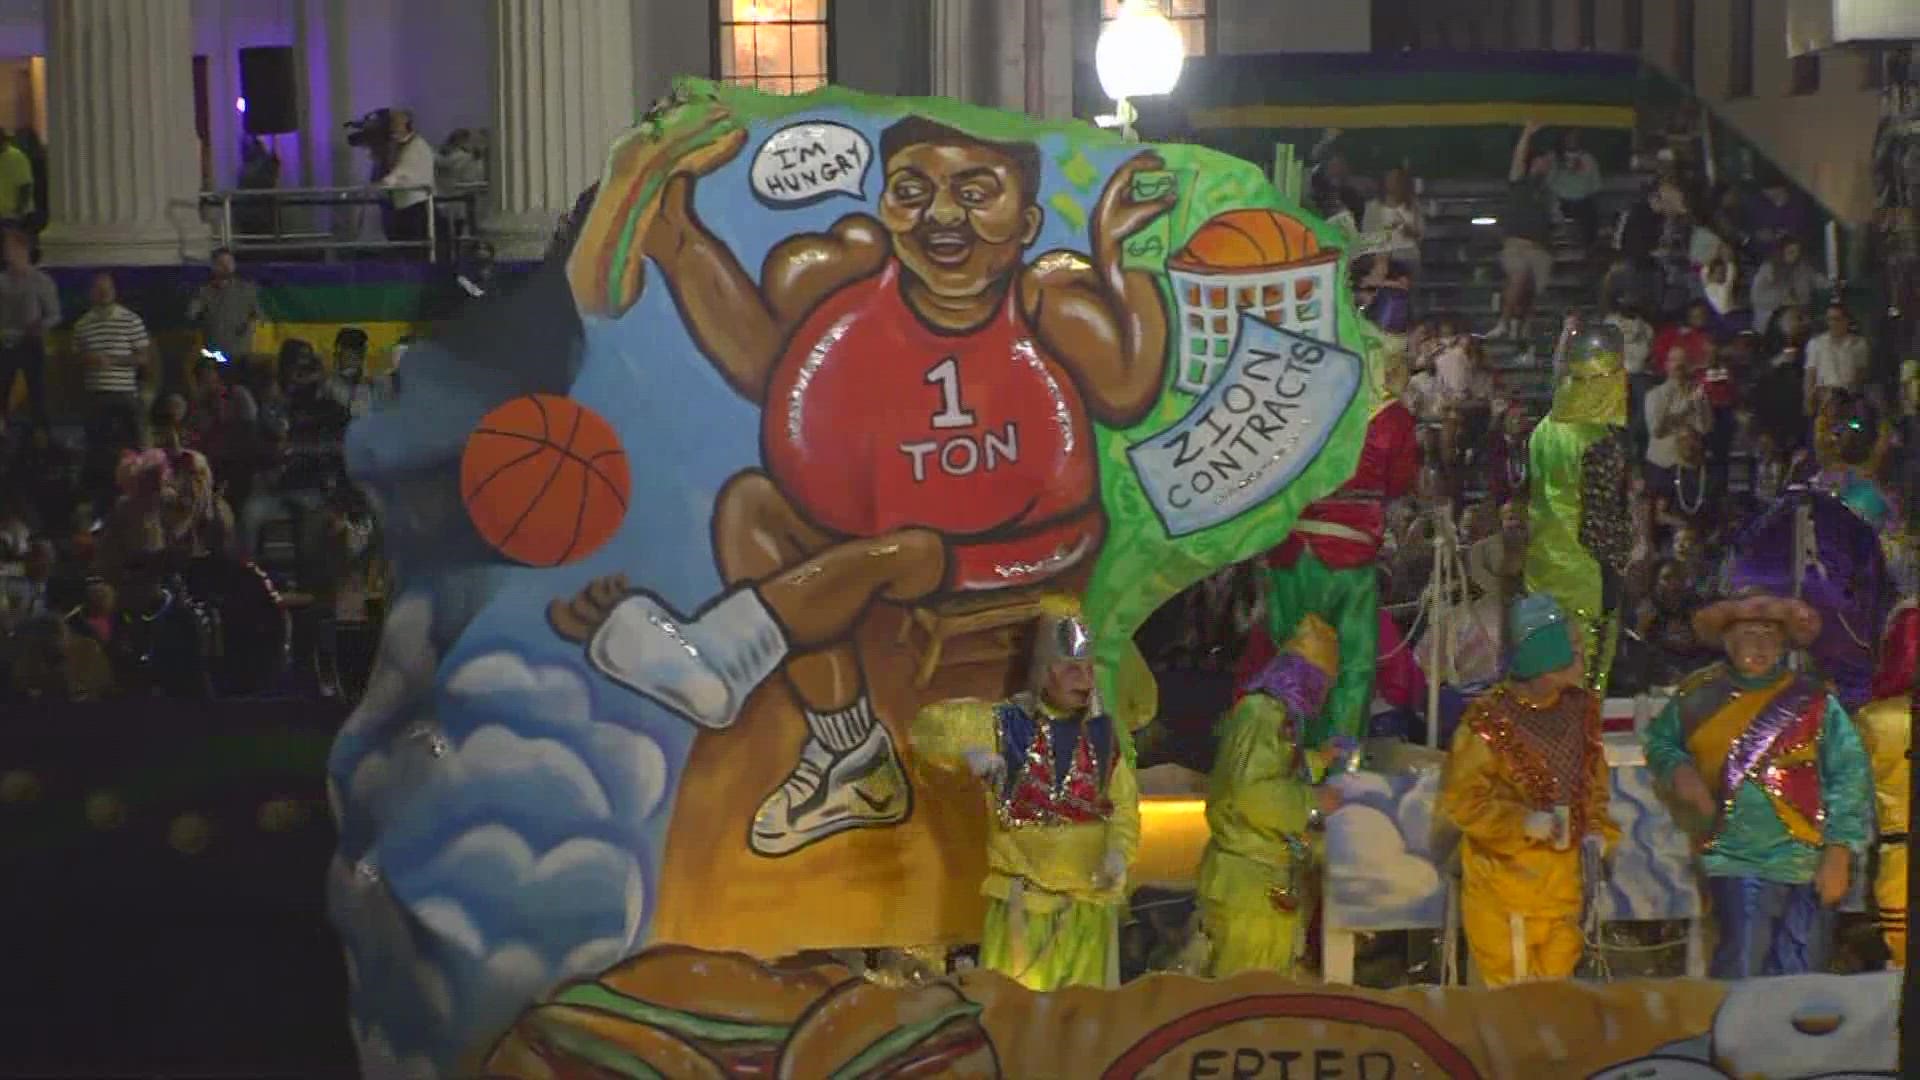 Chaos is one of Carnival's satirical parades and athletes are not spared, but there's a question if a float making fun of Zion Williamson's weight went too far.